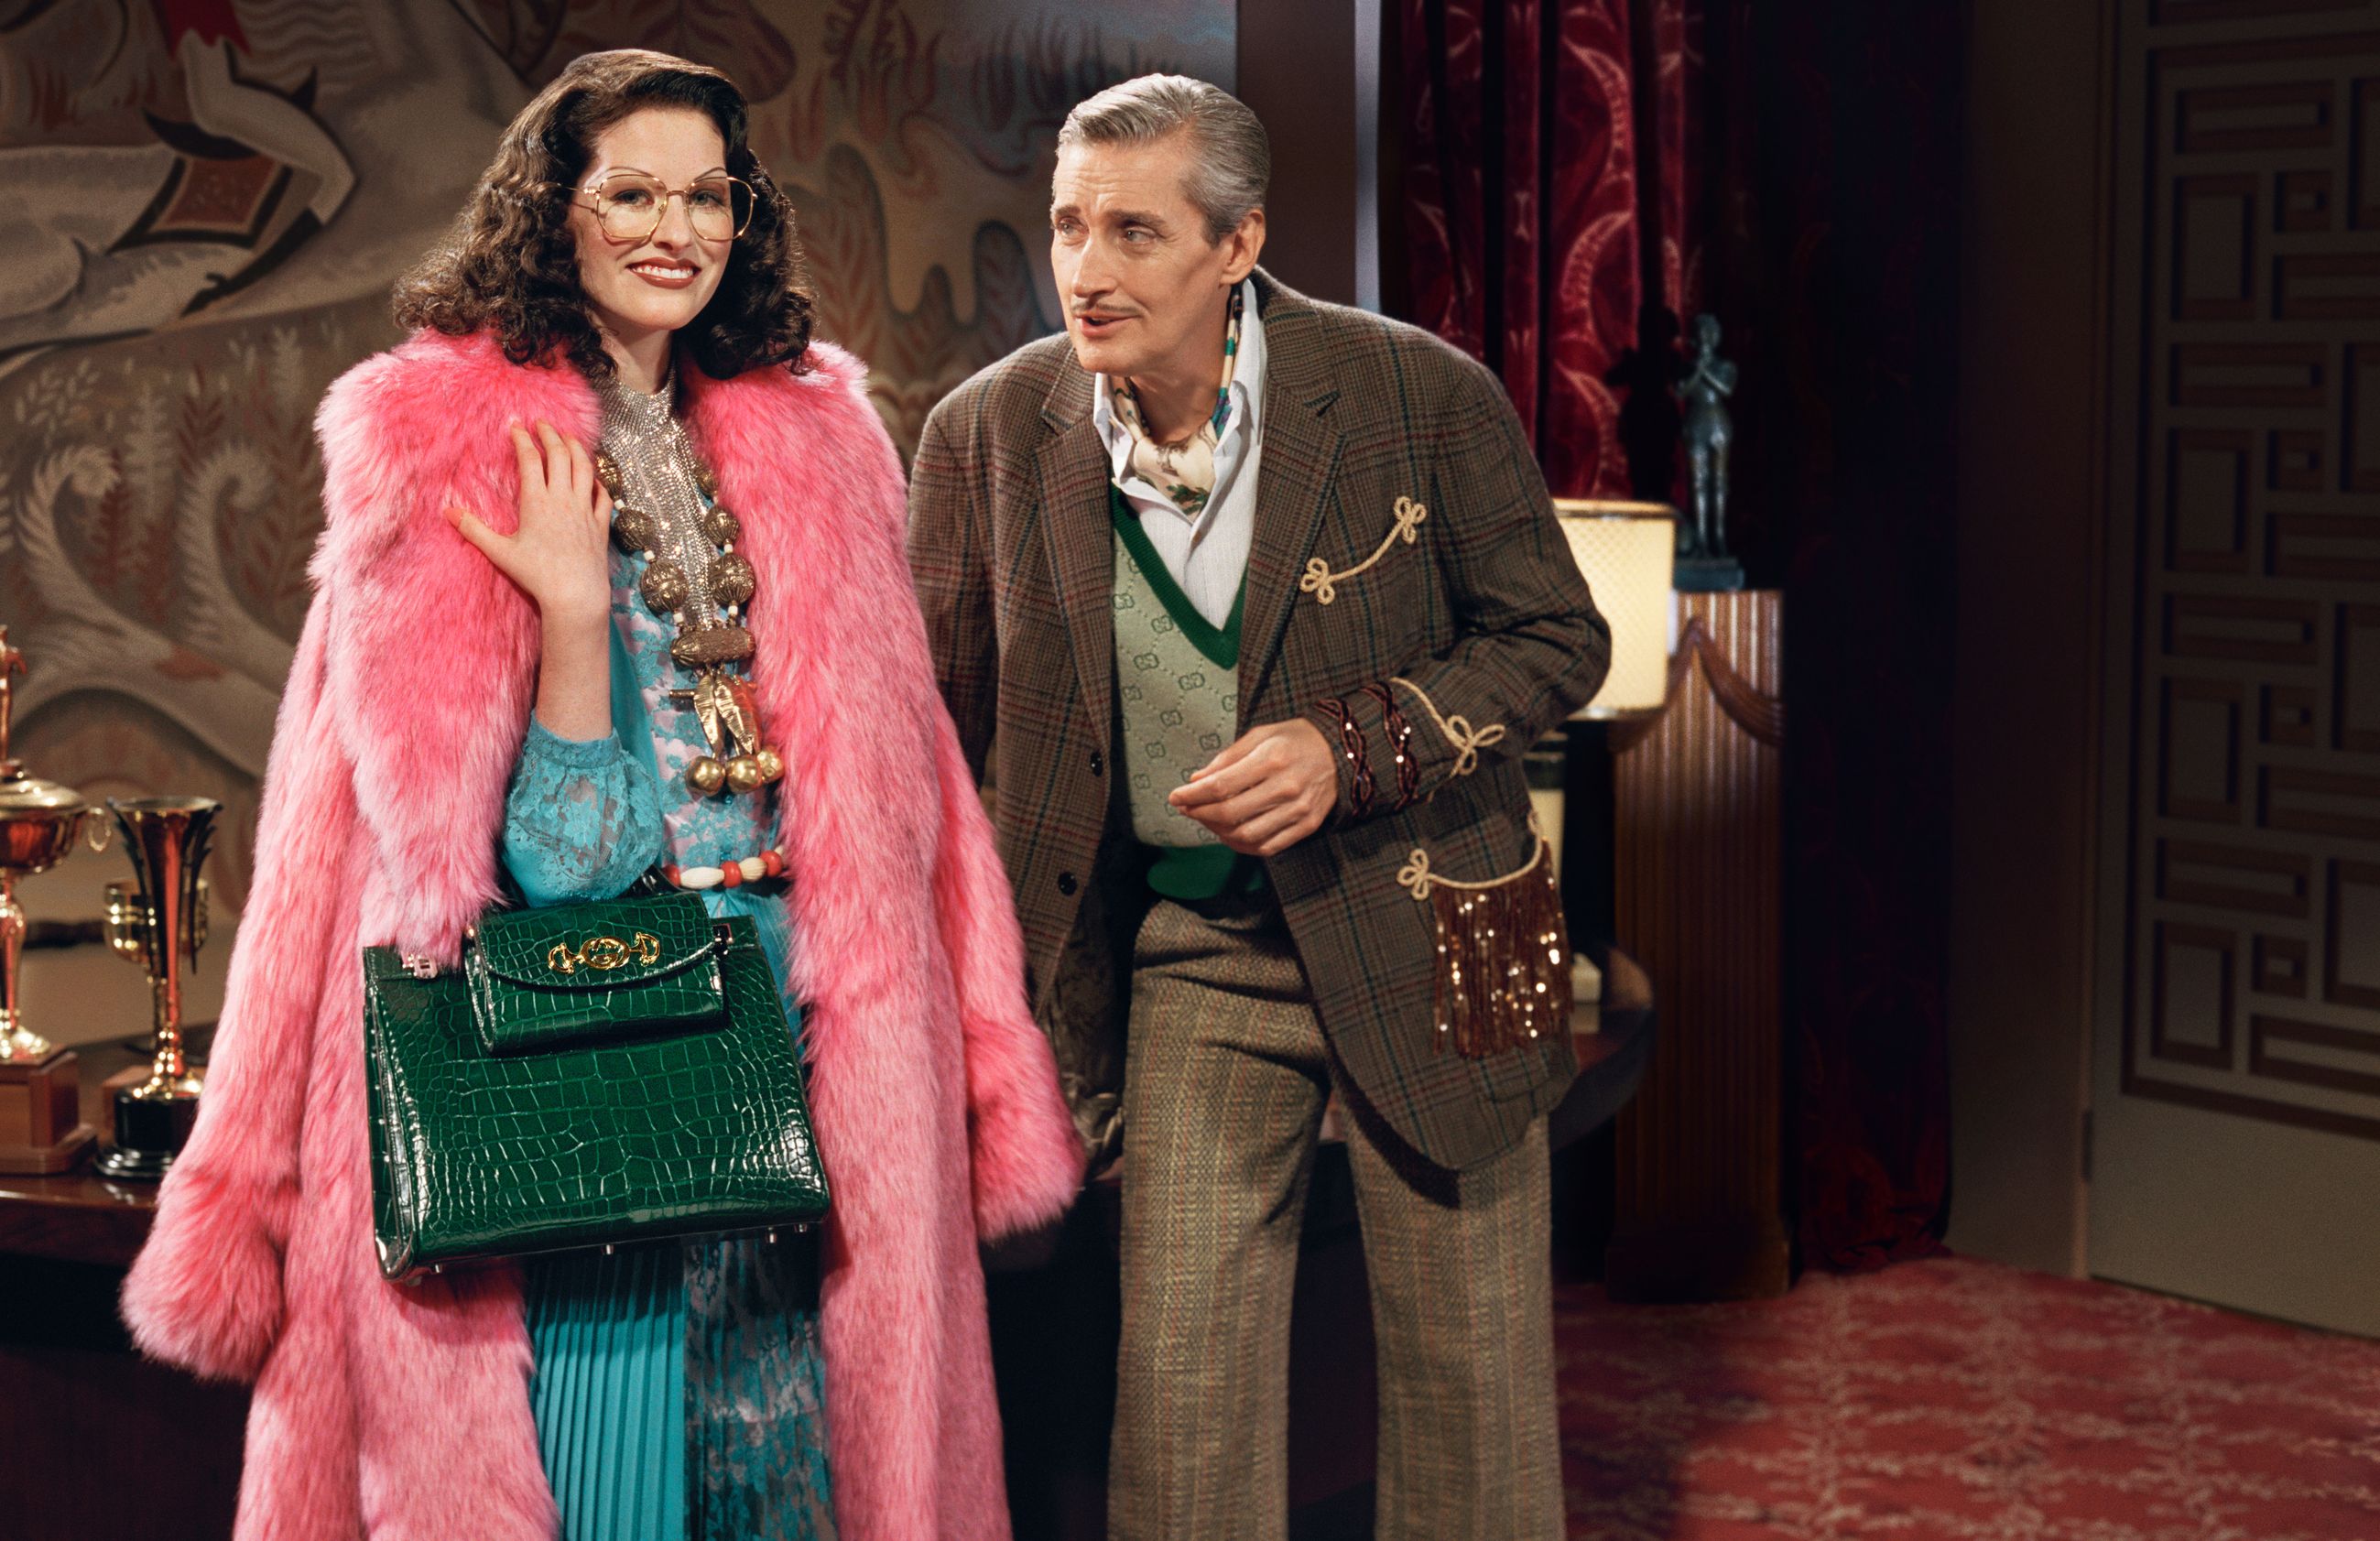 Gucci’s latest Zumi bag exemplifies the best of Italian craftsmanship